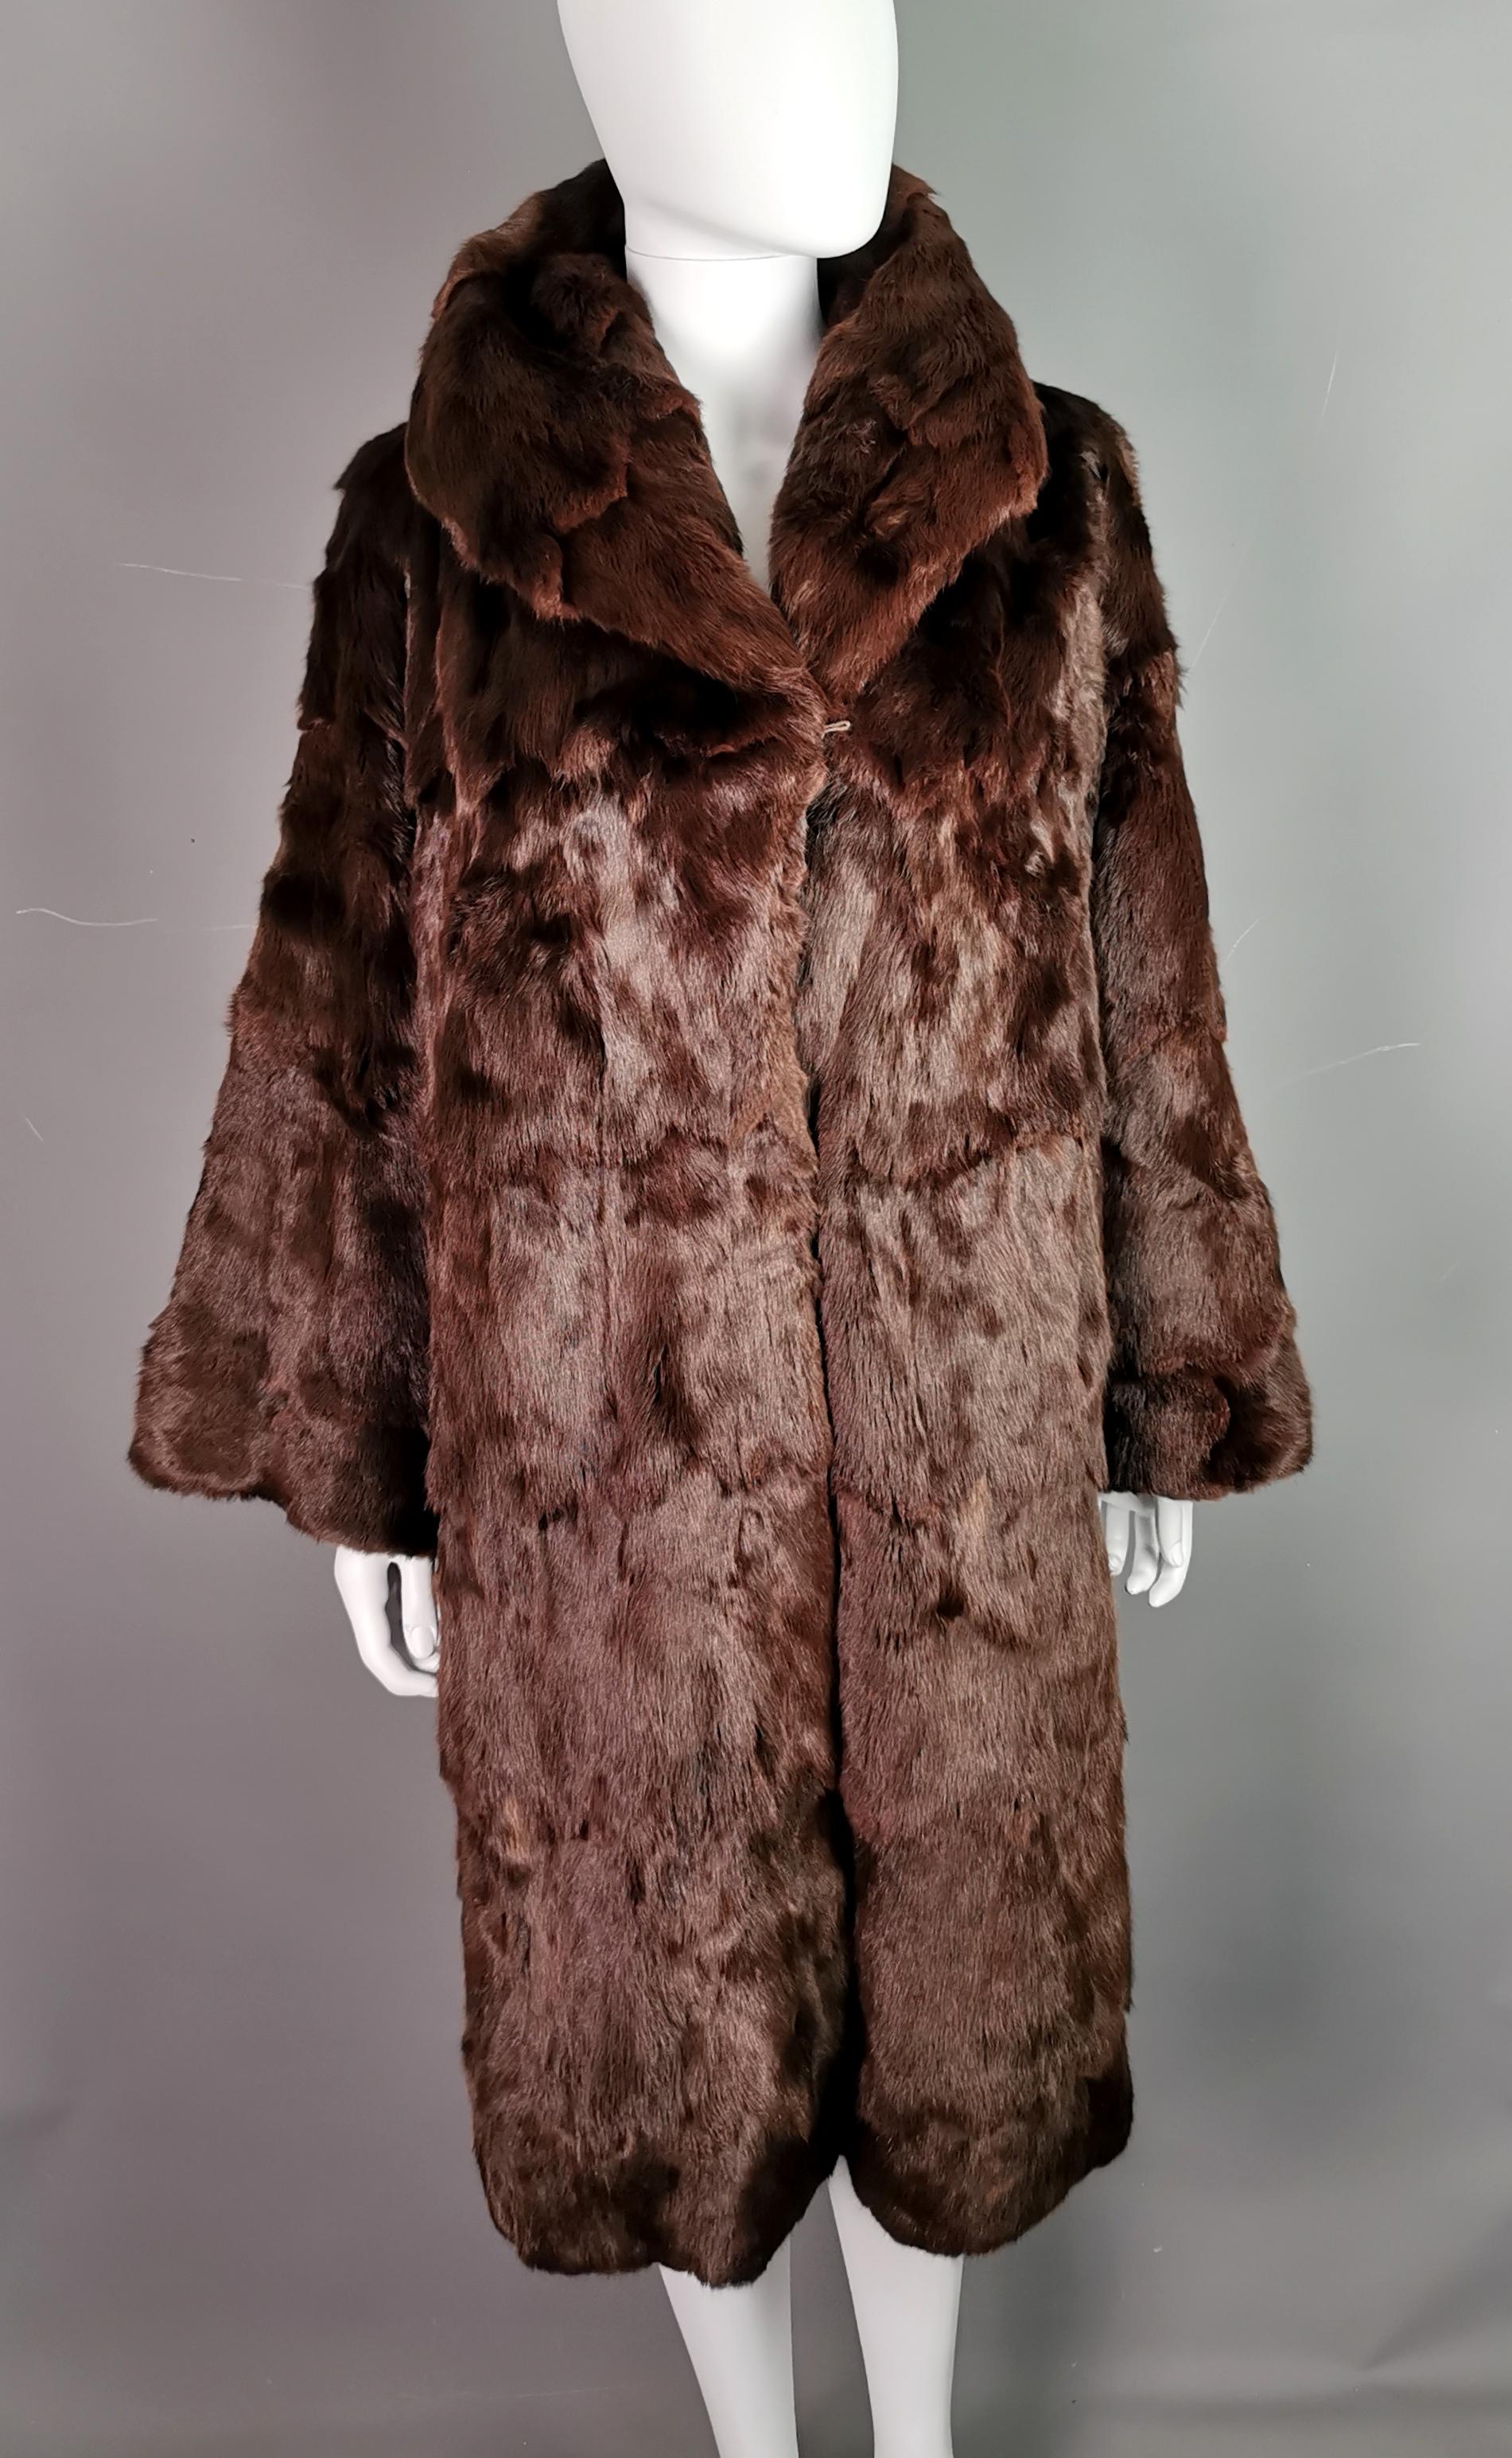 A very fine, high quality vintage mink fur swing coat.

It is made from mahogany brown mink fur, superbly soft and lined in a chocolate brown satin.

It has a nice wide collar with a longer yoke and wide super soft sleeves, a real bombshell